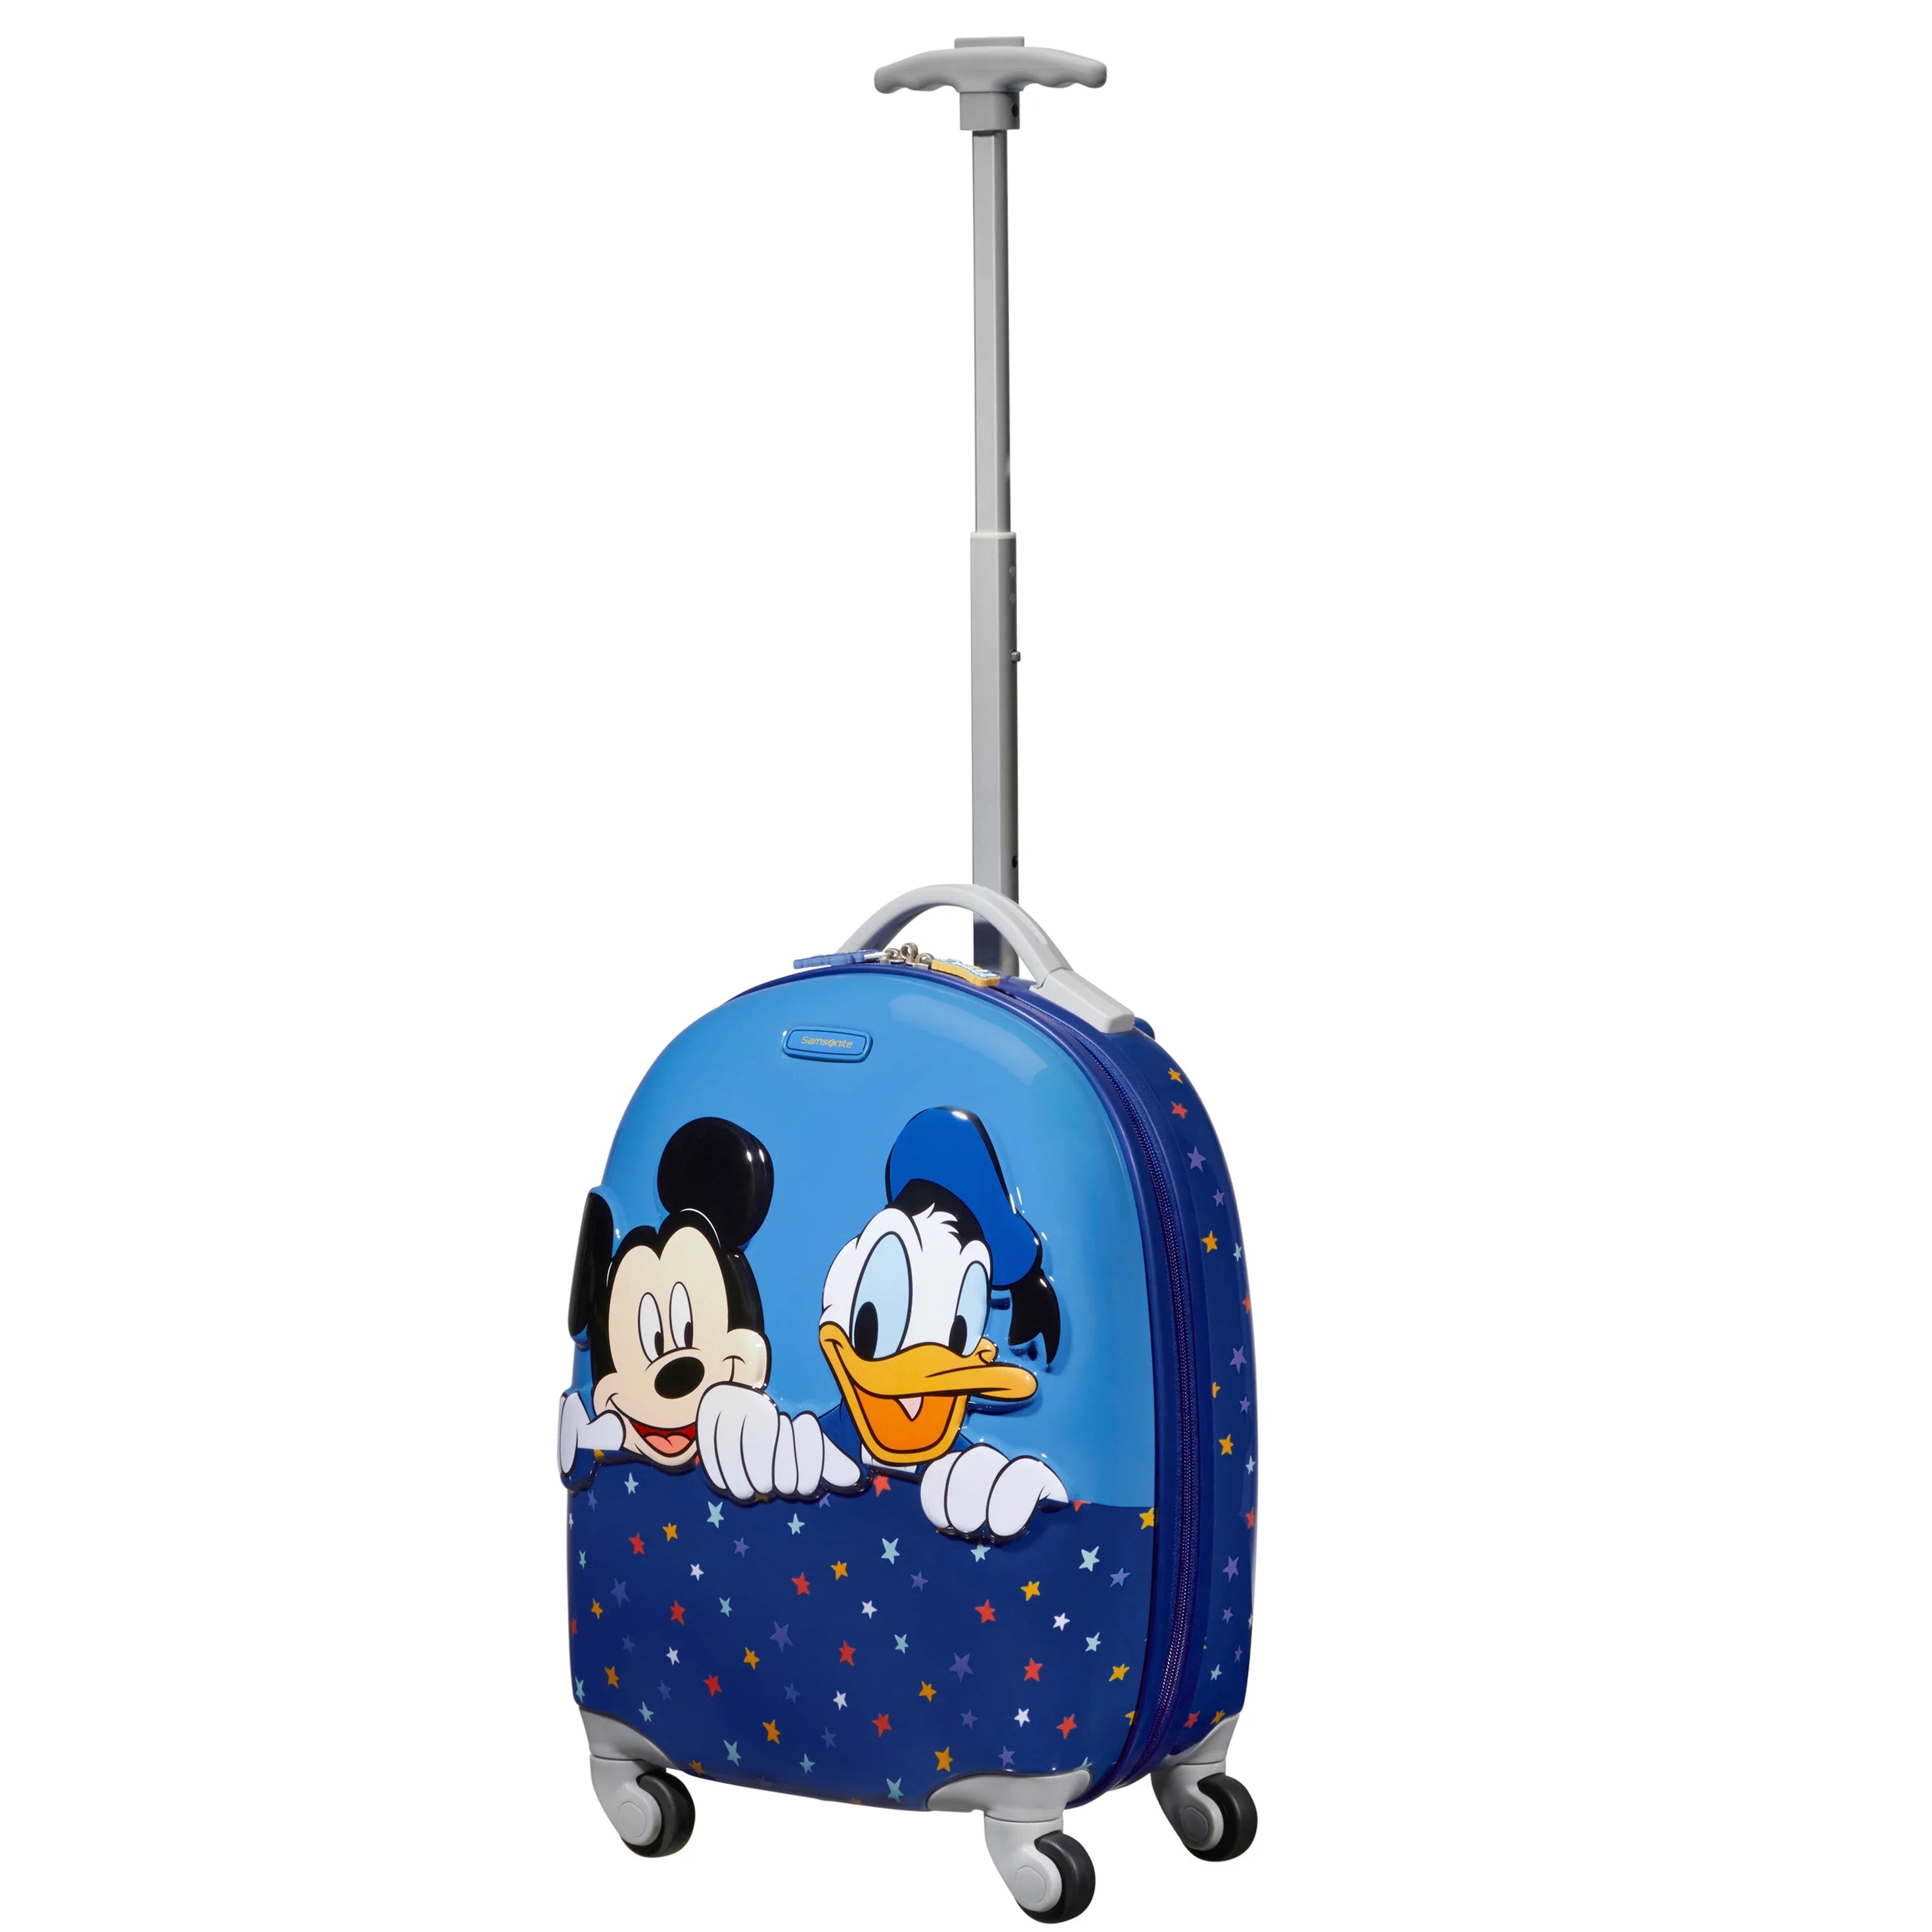 Ulitmate Disney for 2.0 - Sweet travel leisure companions and